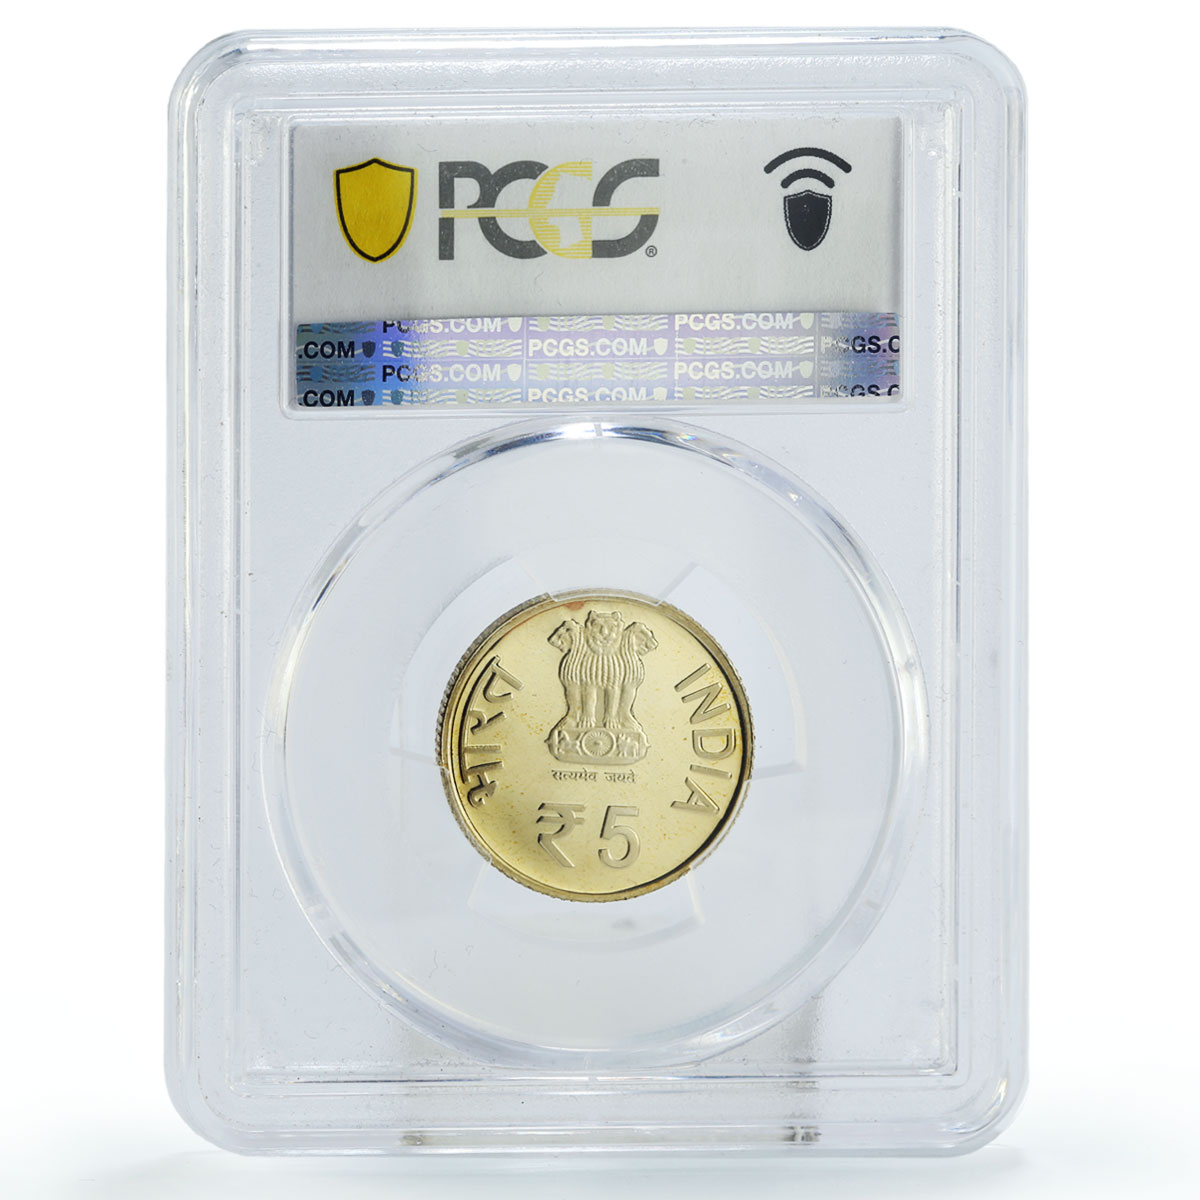 India 5 rupees 150 Years of Motilal Nehru PR68 PCGS NiBrass coin 2012